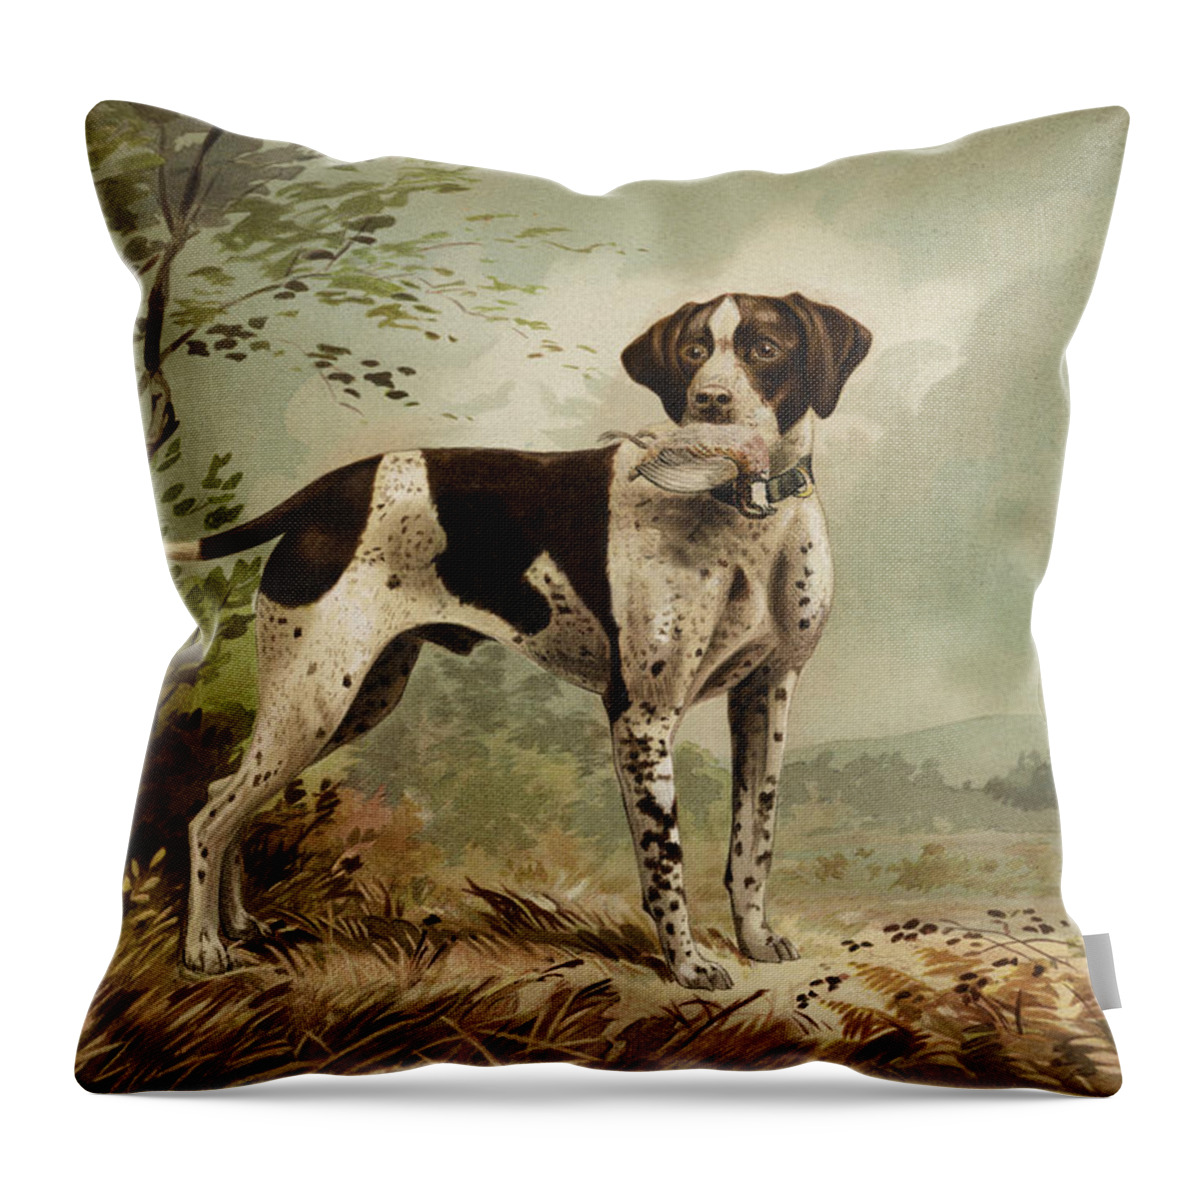 Haunting Dog Throw Pillow featuring the painting Hunting Dog circa 1879 by Aged Pixel